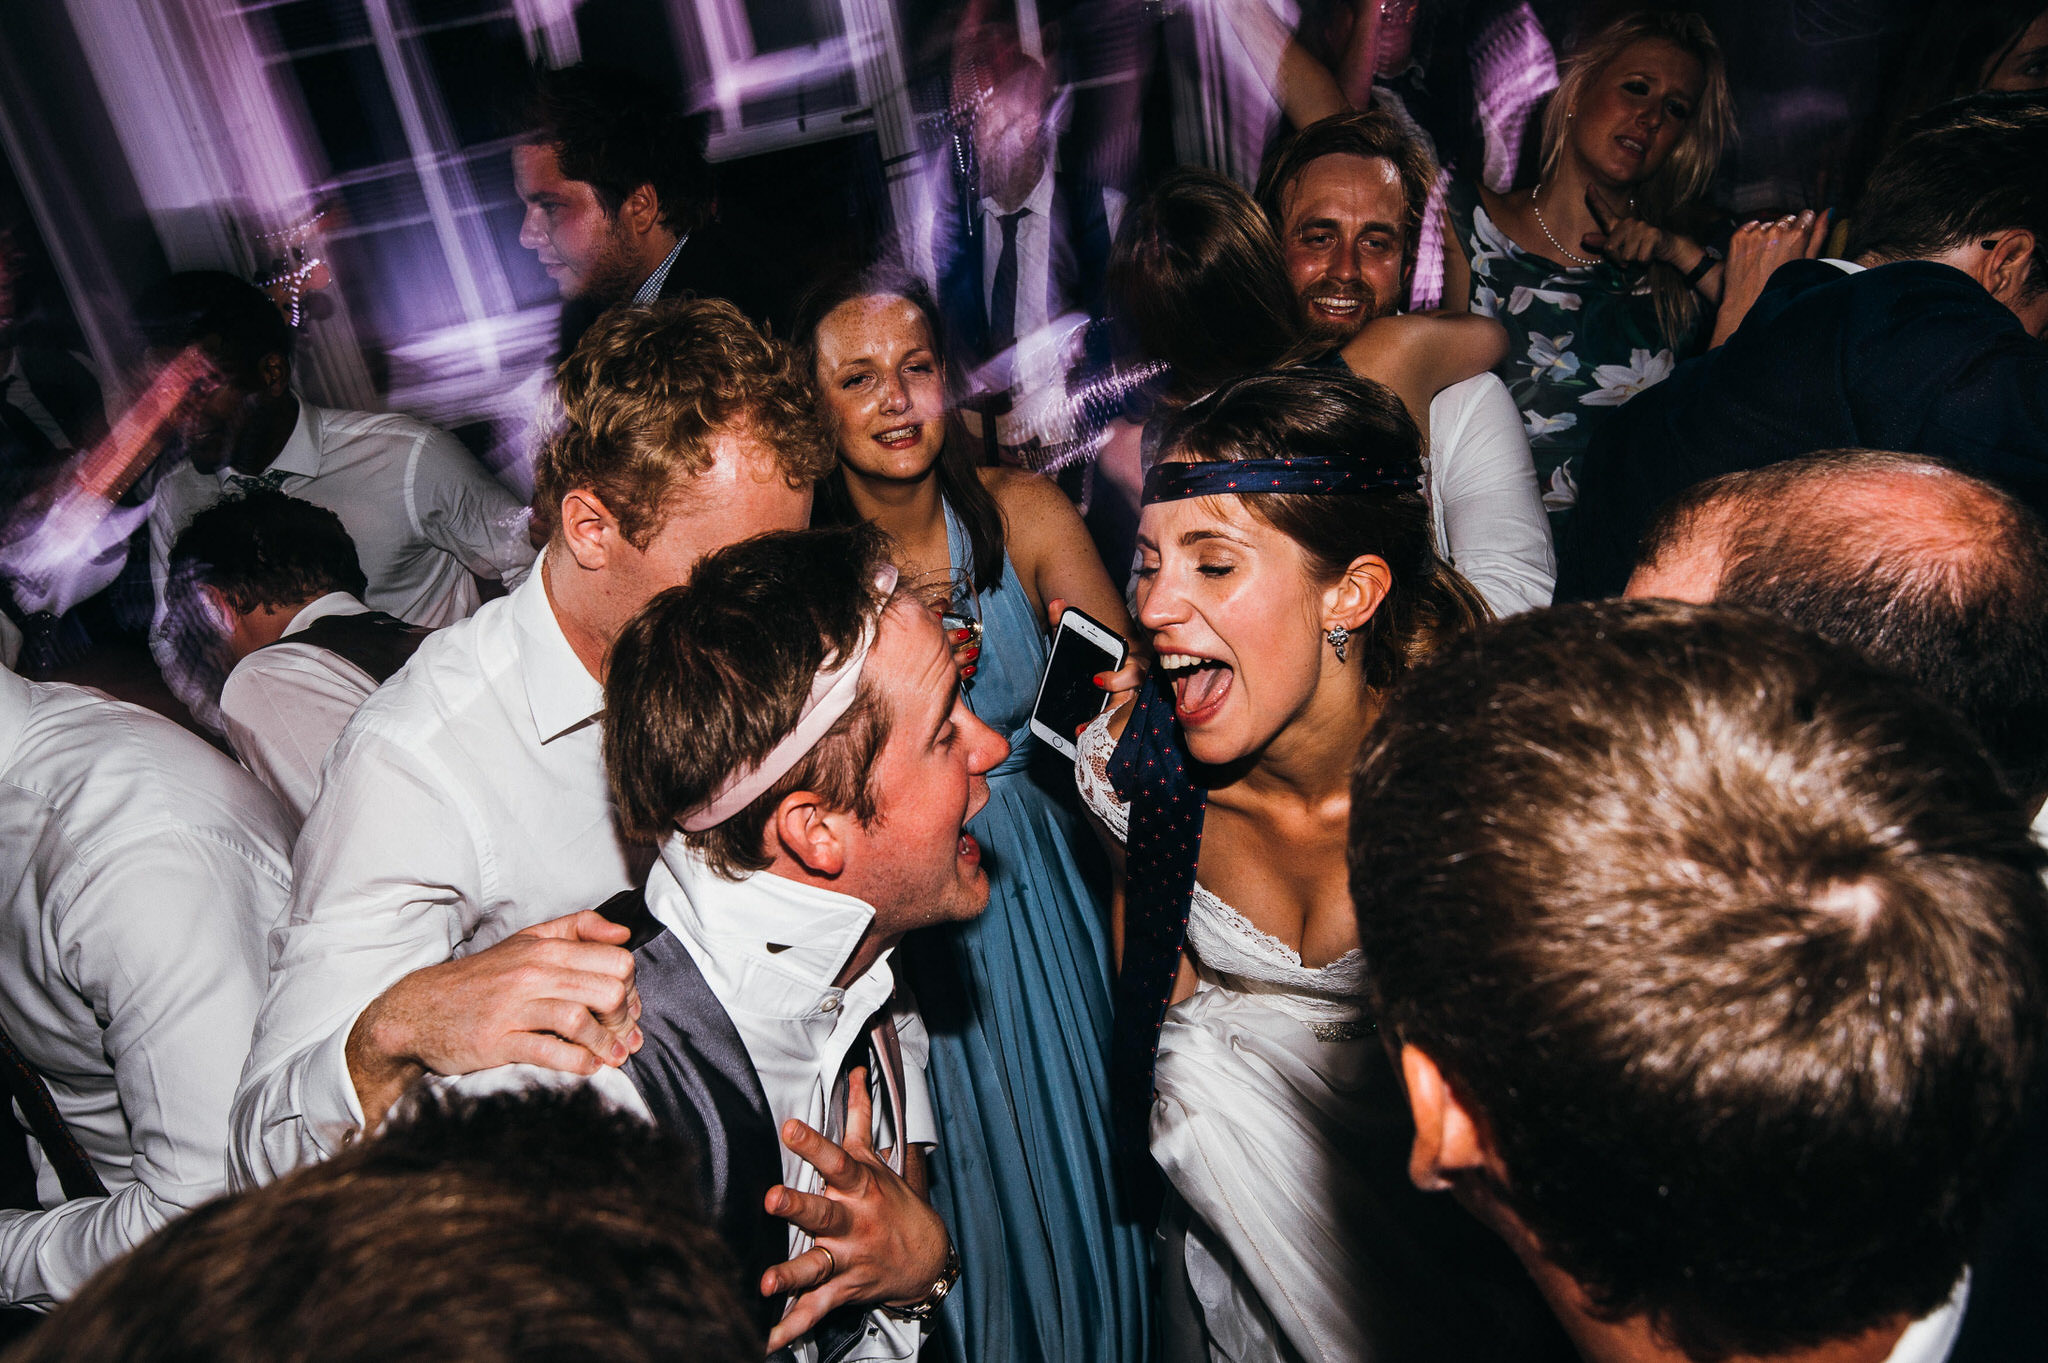 Dancing at Nonsuch mansion wedding 